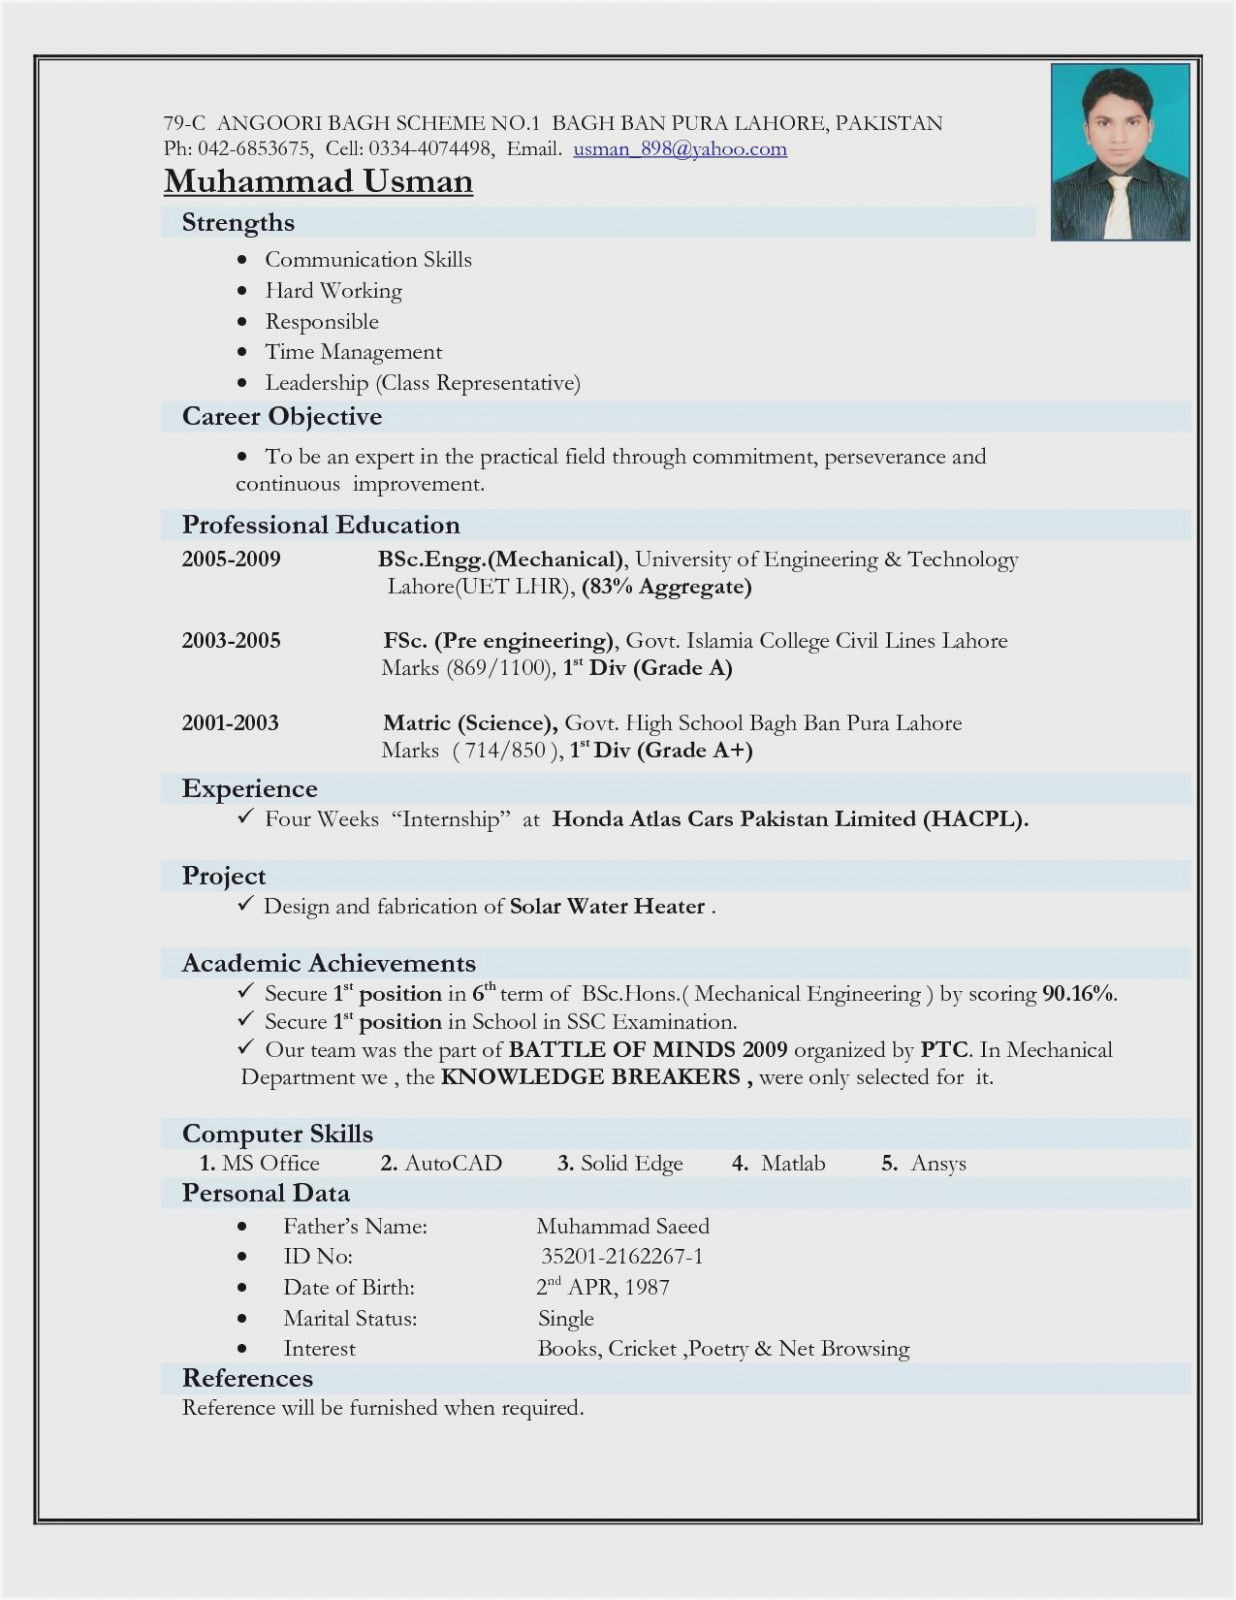 Resume Template for Computer Engineer Fresher 12 Engineer Resume Template Doc Job Resume format, Resume format …